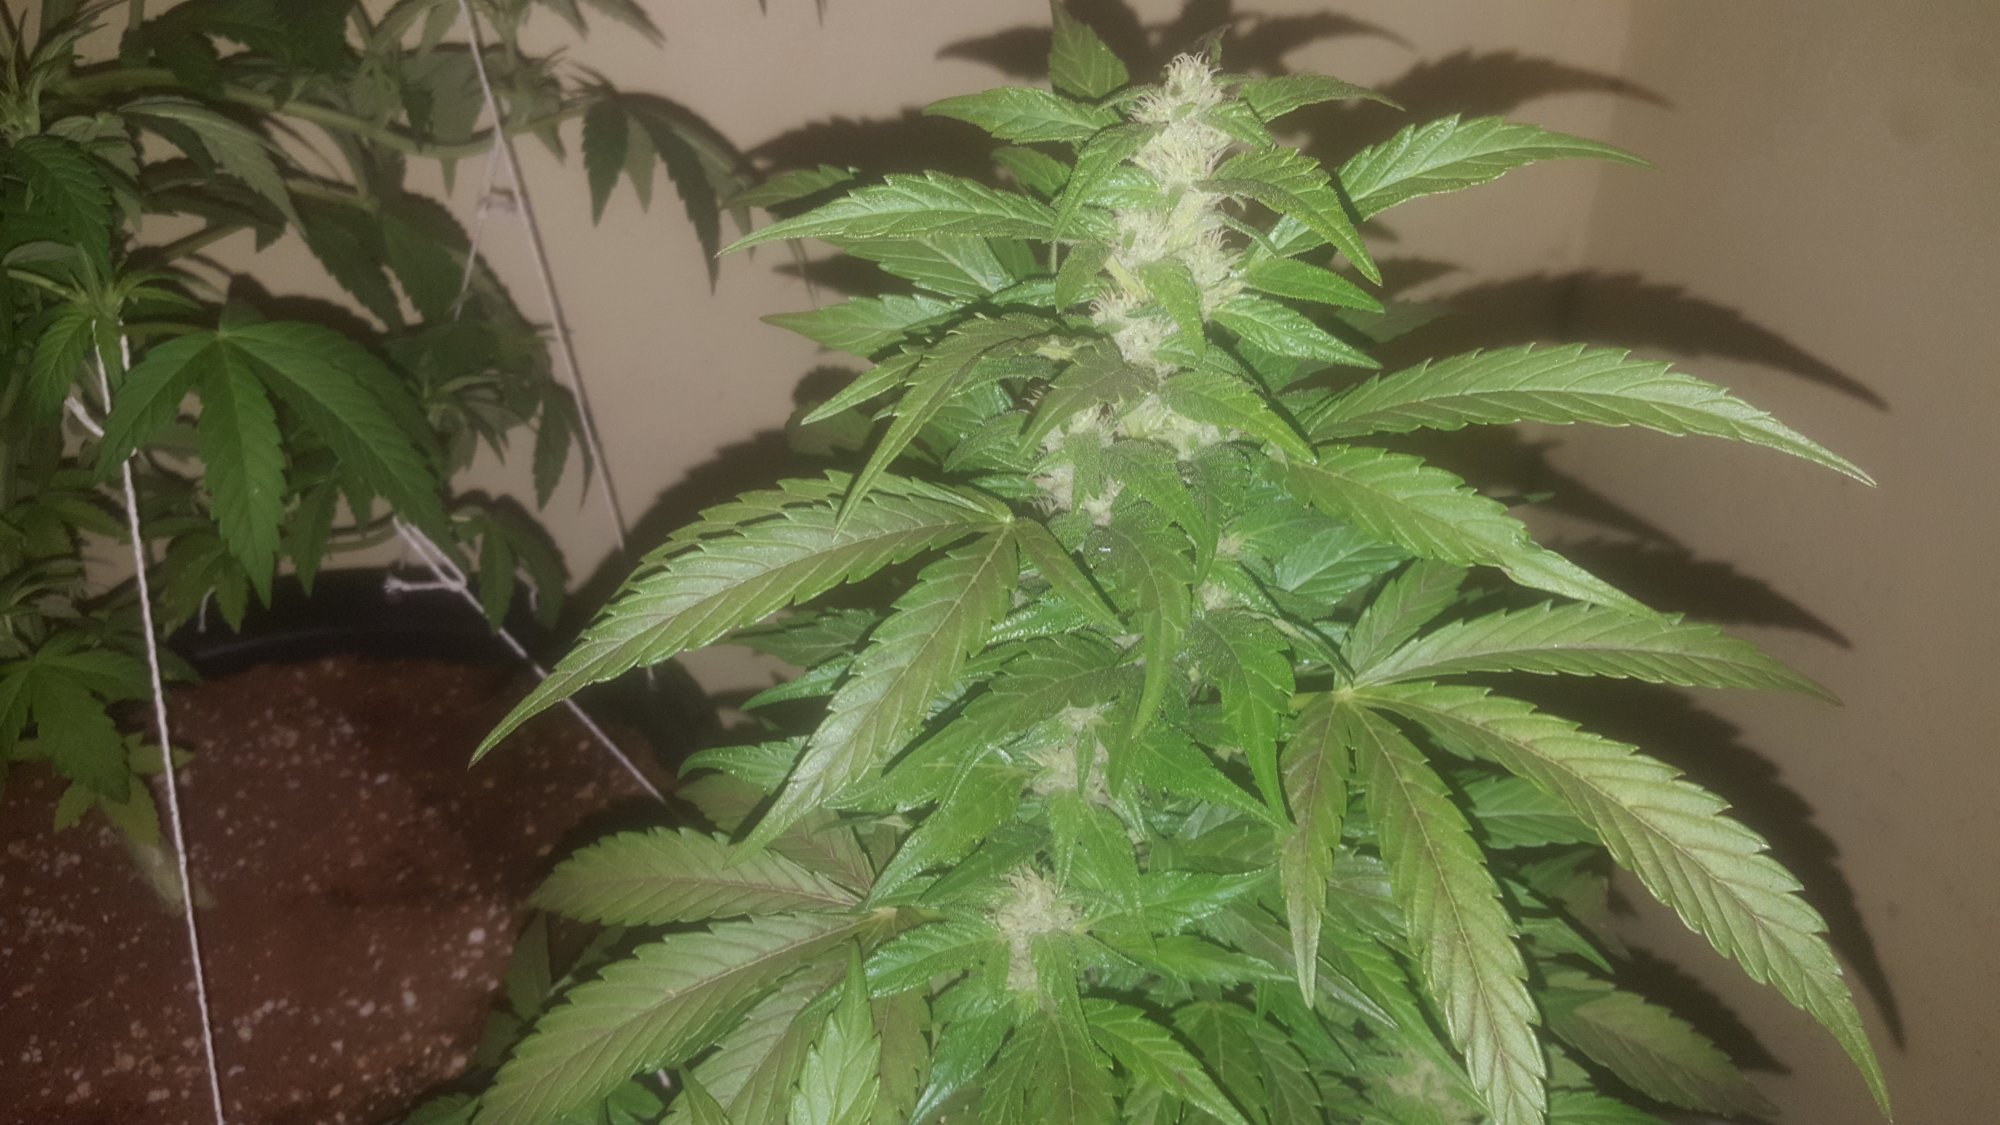 Day 79 from seedjust an update 4